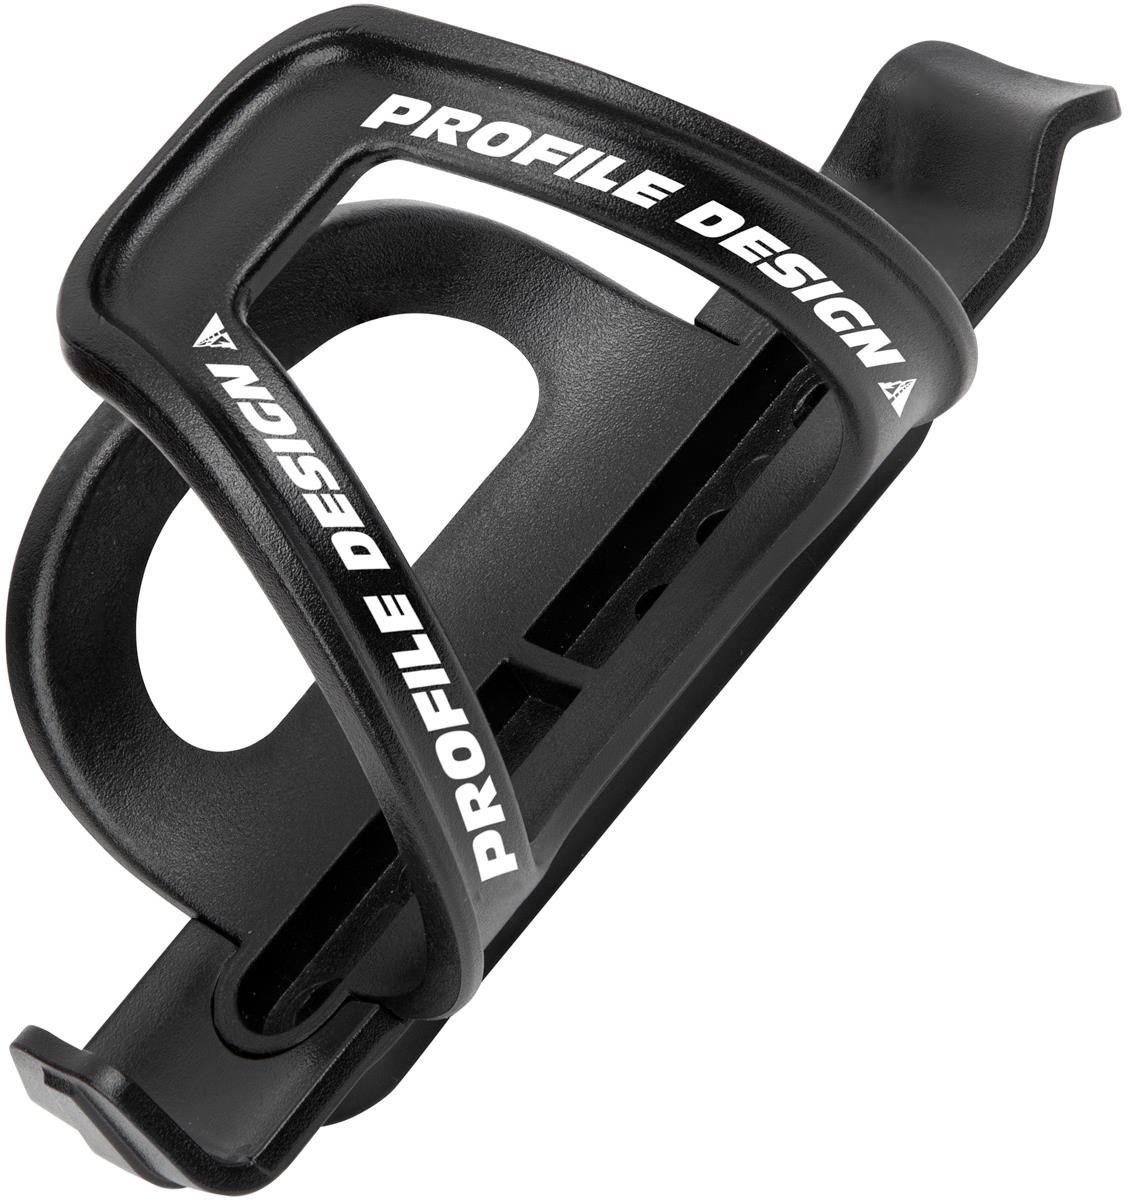 Profile Design Axis Side Entry Water Bottle Cage Holder product image